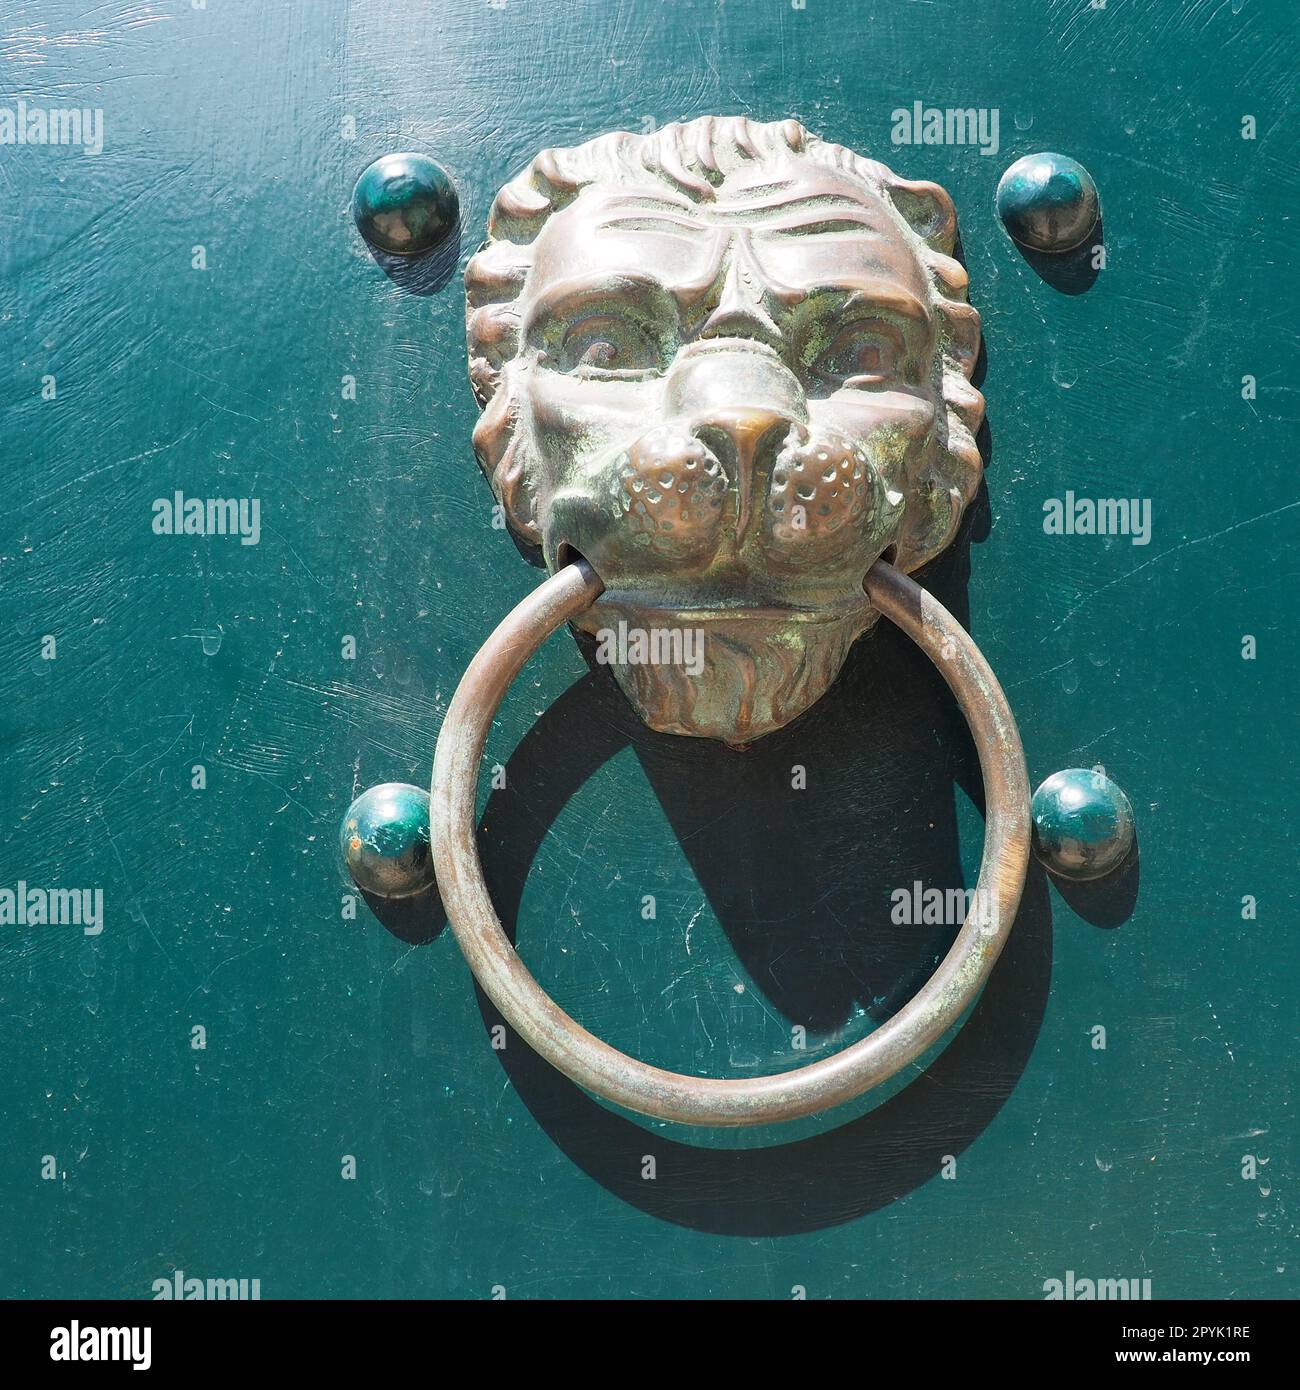 A door knocker is a fixture on the front door of a house. It is made of metal and has the form of a ring, which is knocked on the metal part of the door knocker fixed to the wall. Muzzle of a lion. Stock Photo